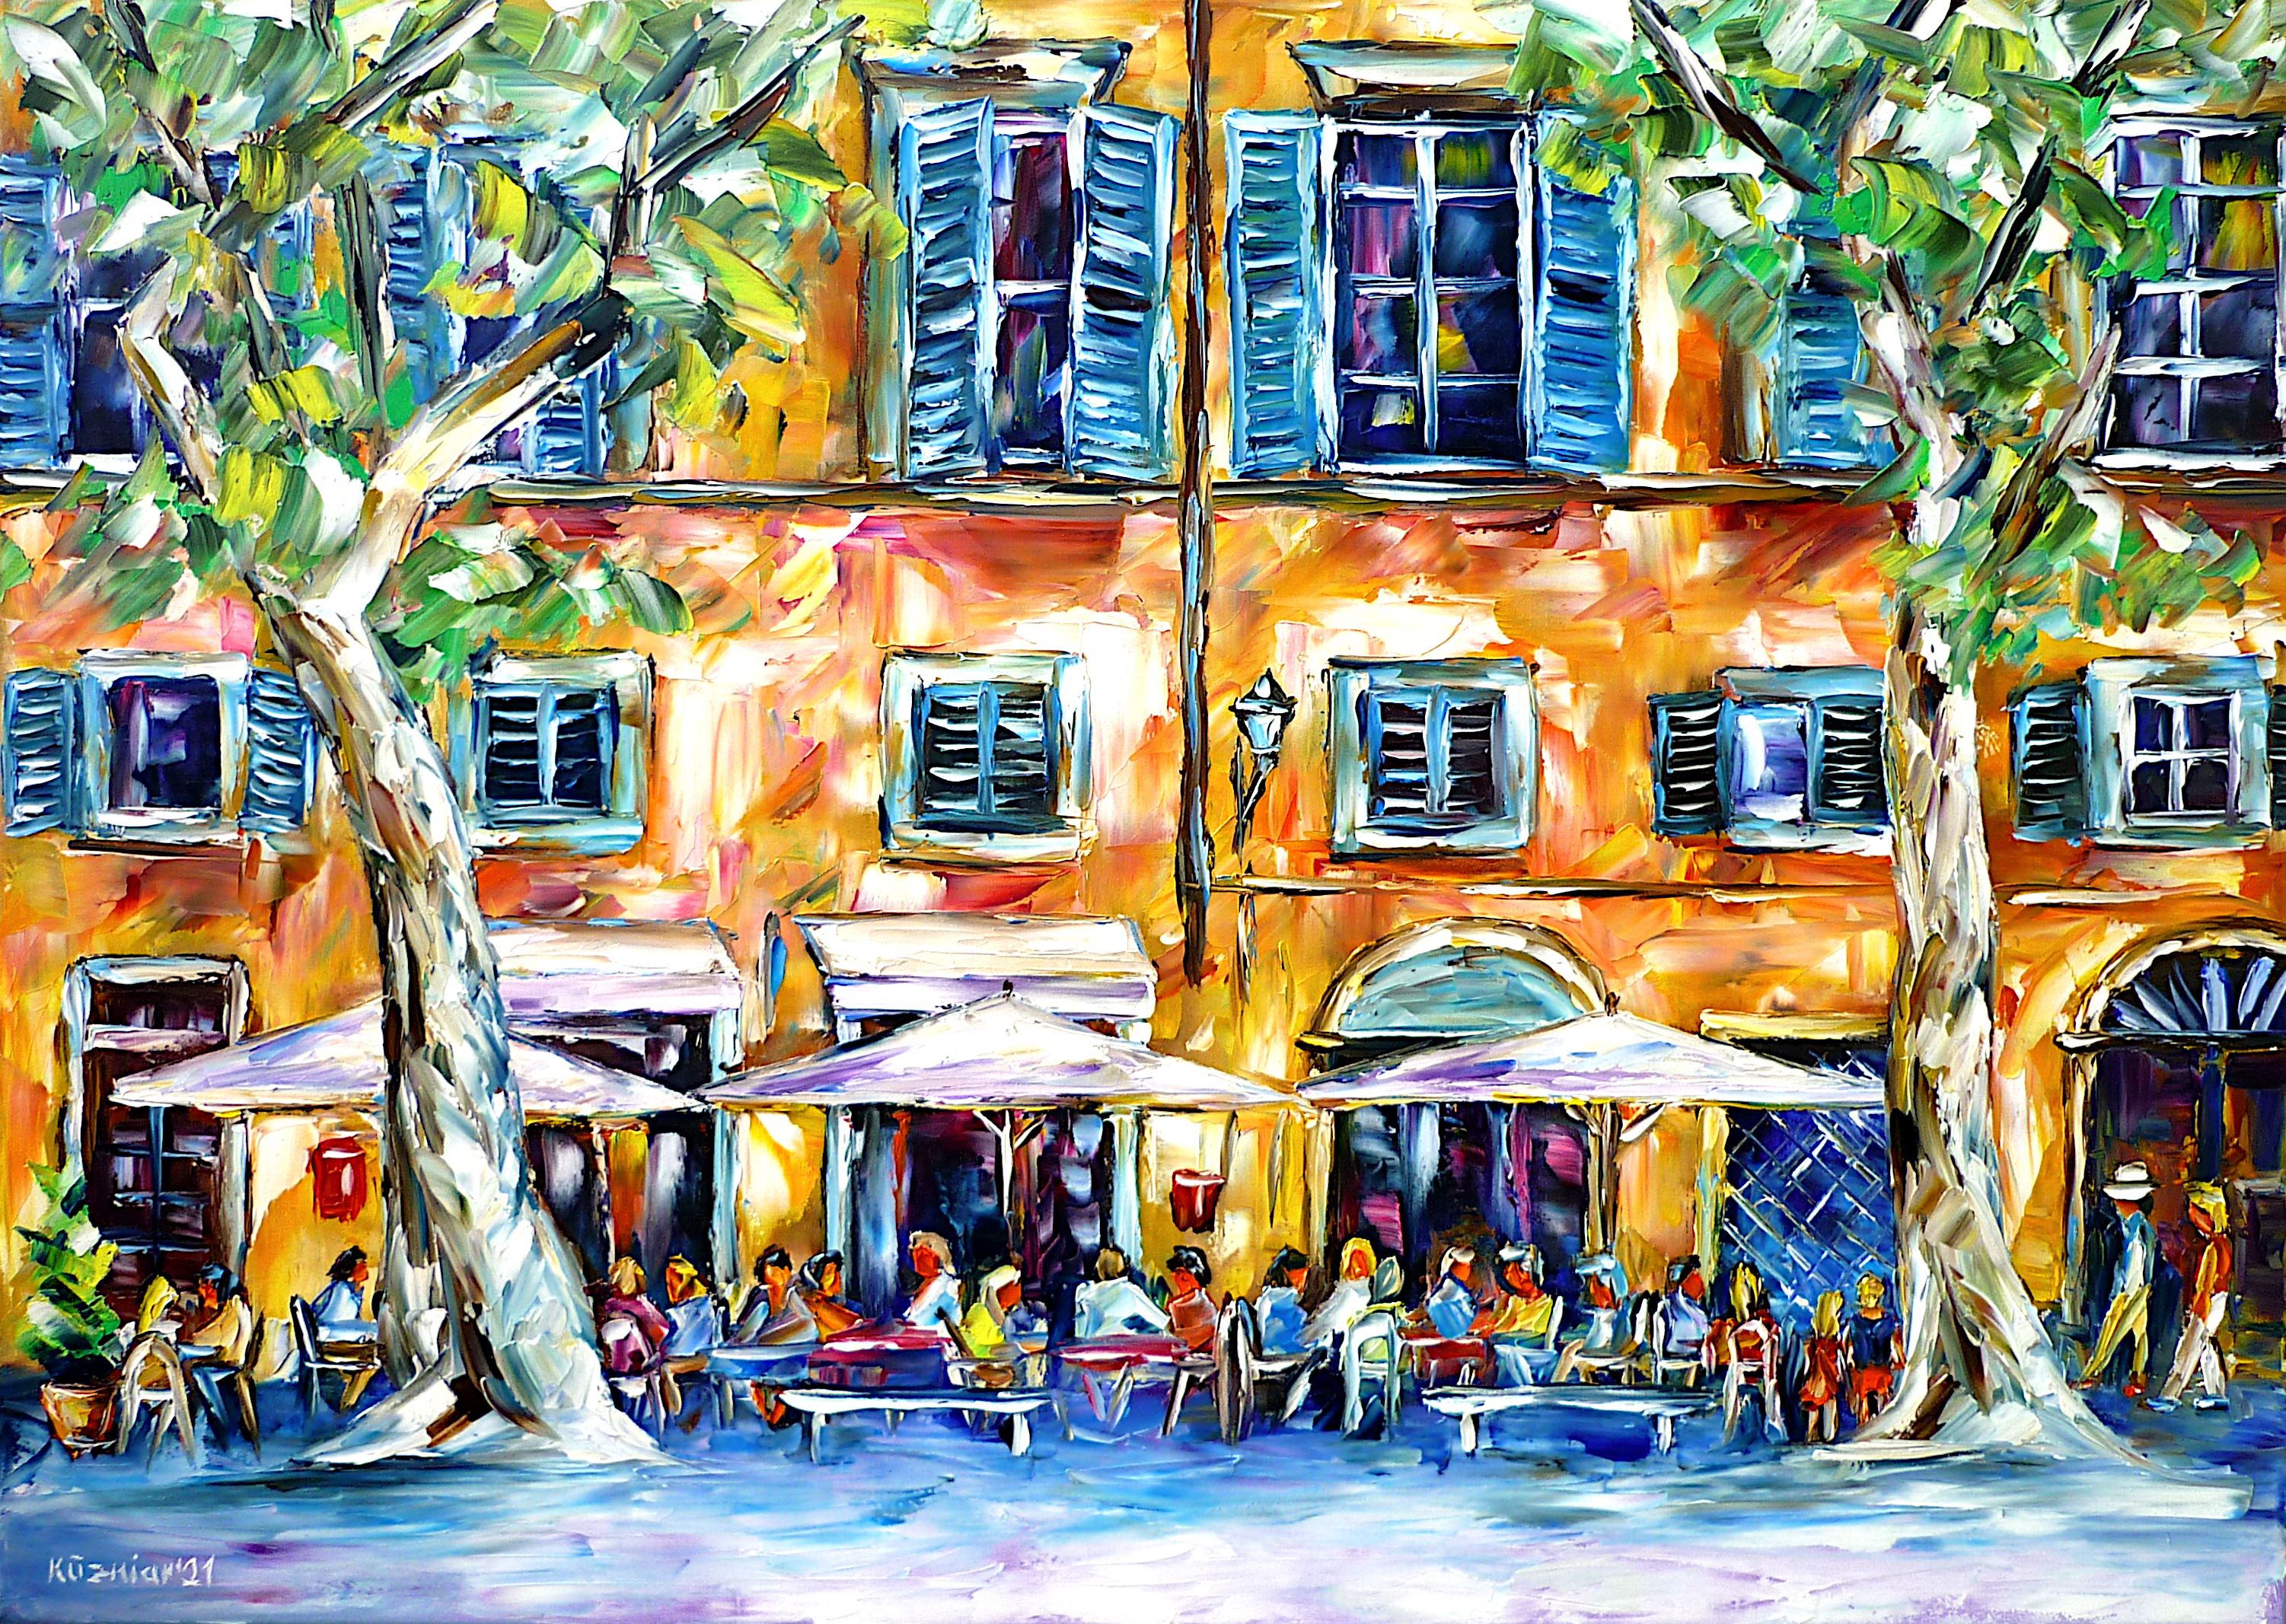 people in the cafe,lucca in summer,sitting in the cafe,sitting outside,people in summer,enjoying summer,cafe in lucca,lucca caffe,lucca gelateria,lucca bar,lucca cityscape,lucca city scenery,beautiful tuscany,tuscany romance,holm oaks trees,tuscany picture,lucca painting,tuscany love,summer painting,italy lovers,summer feelings,summer colors,tuscany sun,sunlight,summer in italy,summer in tuscany,joy,friendly picture,friendly painting,peace,peaceful picture,peaceful painting,palette knife oil painting,modernart,impressionism,expressionism,figurative,abstract painting,lively colours,colorful painting,bright colors,light reflections,impasto painting,living room art,living room picture,living room painting